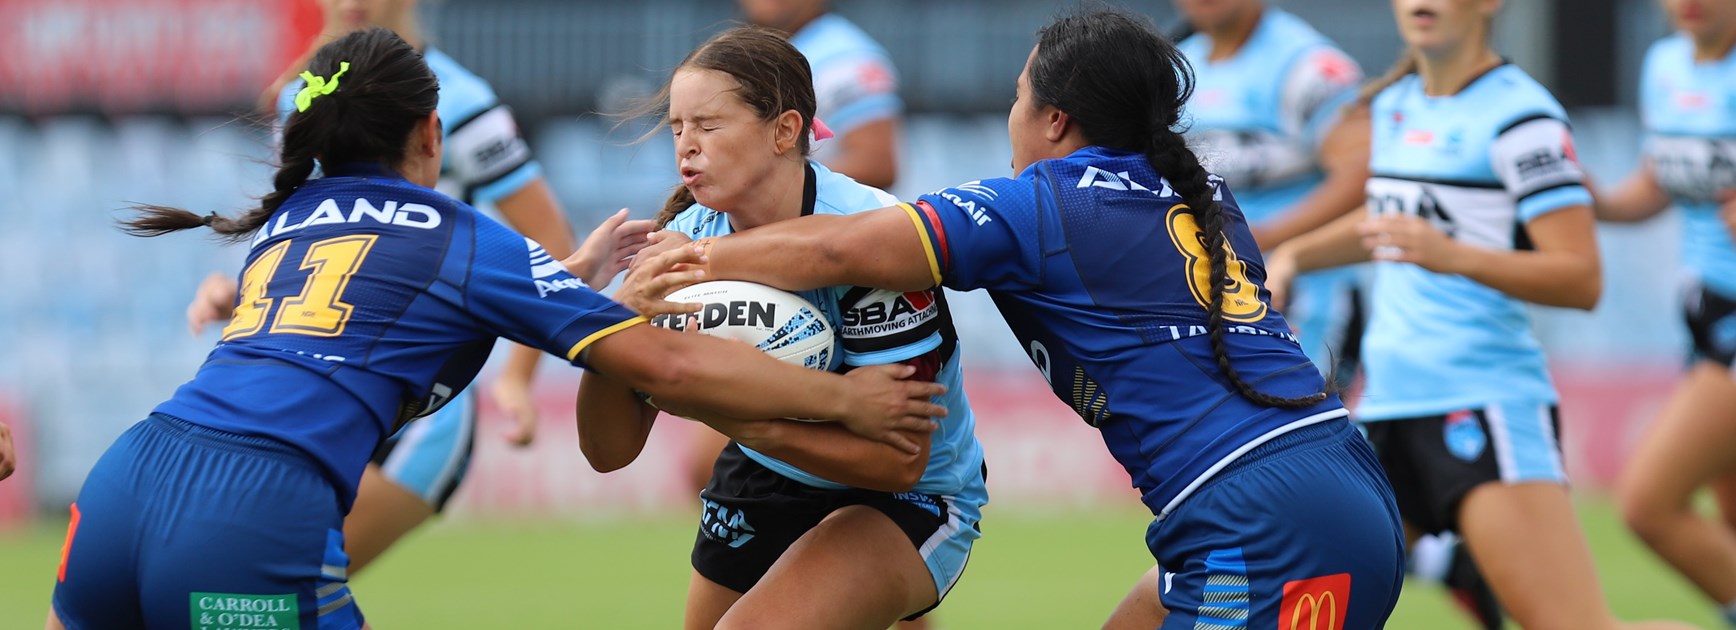 Mixed results for Sharks girls against Eels